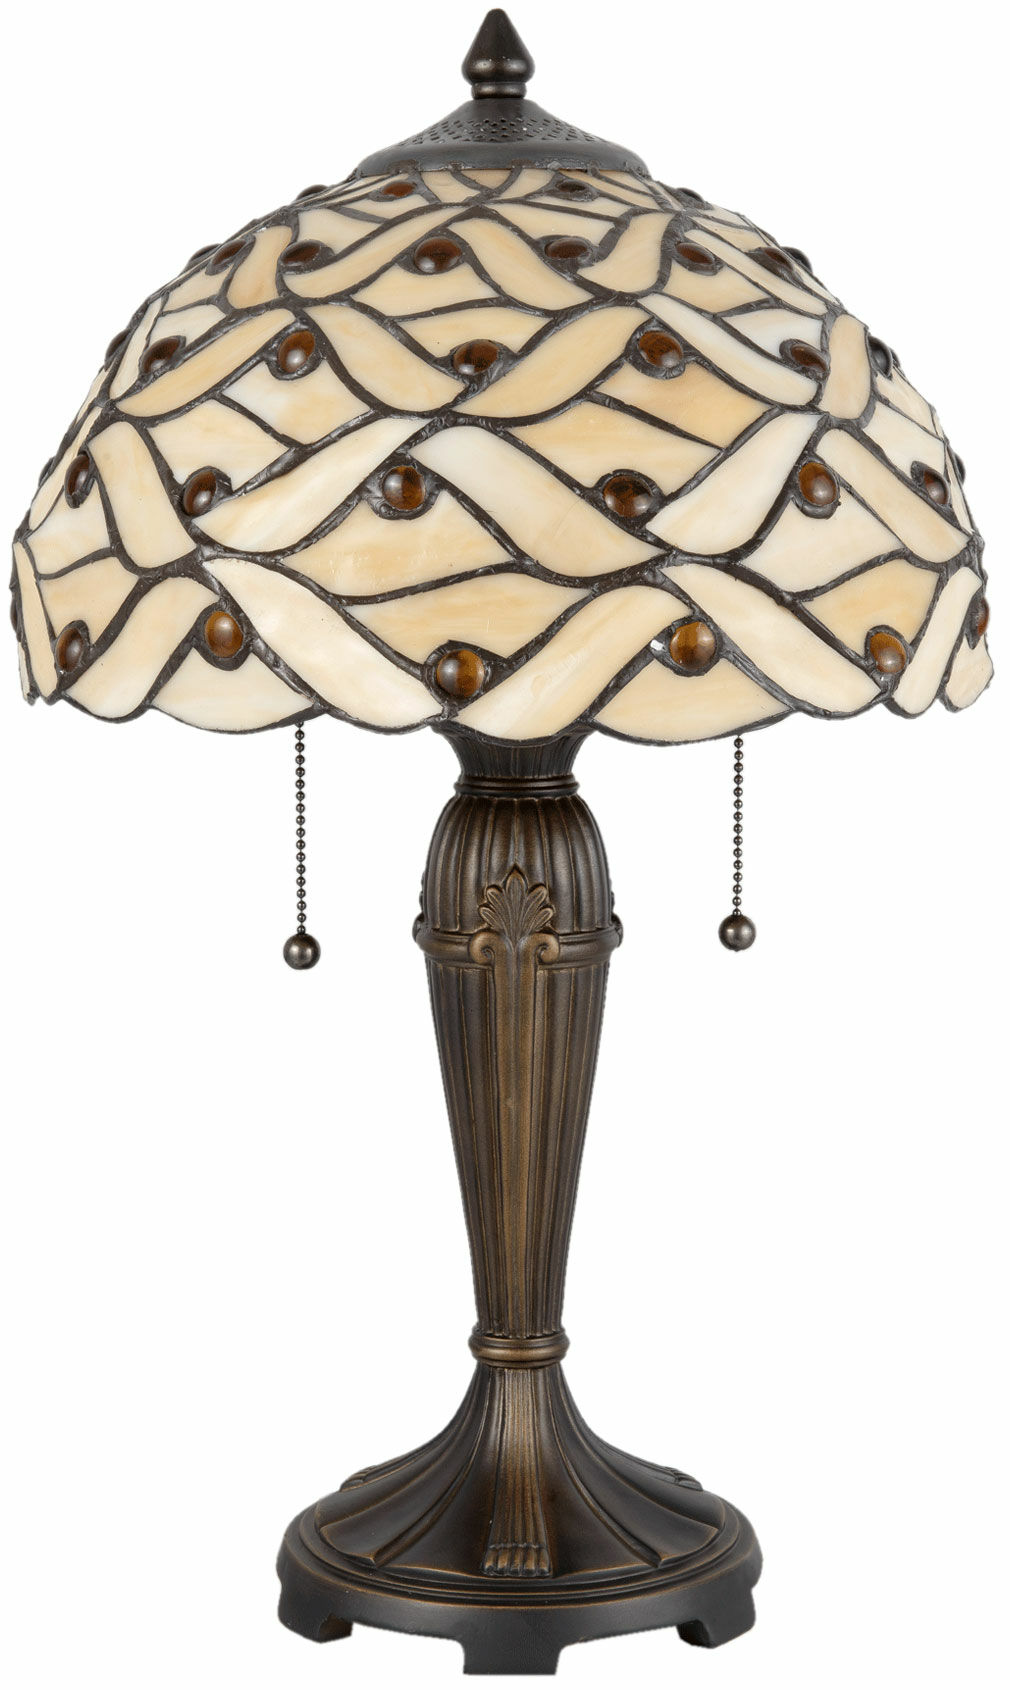 Table lamp "Amelia" - after Louis C. Tiffany